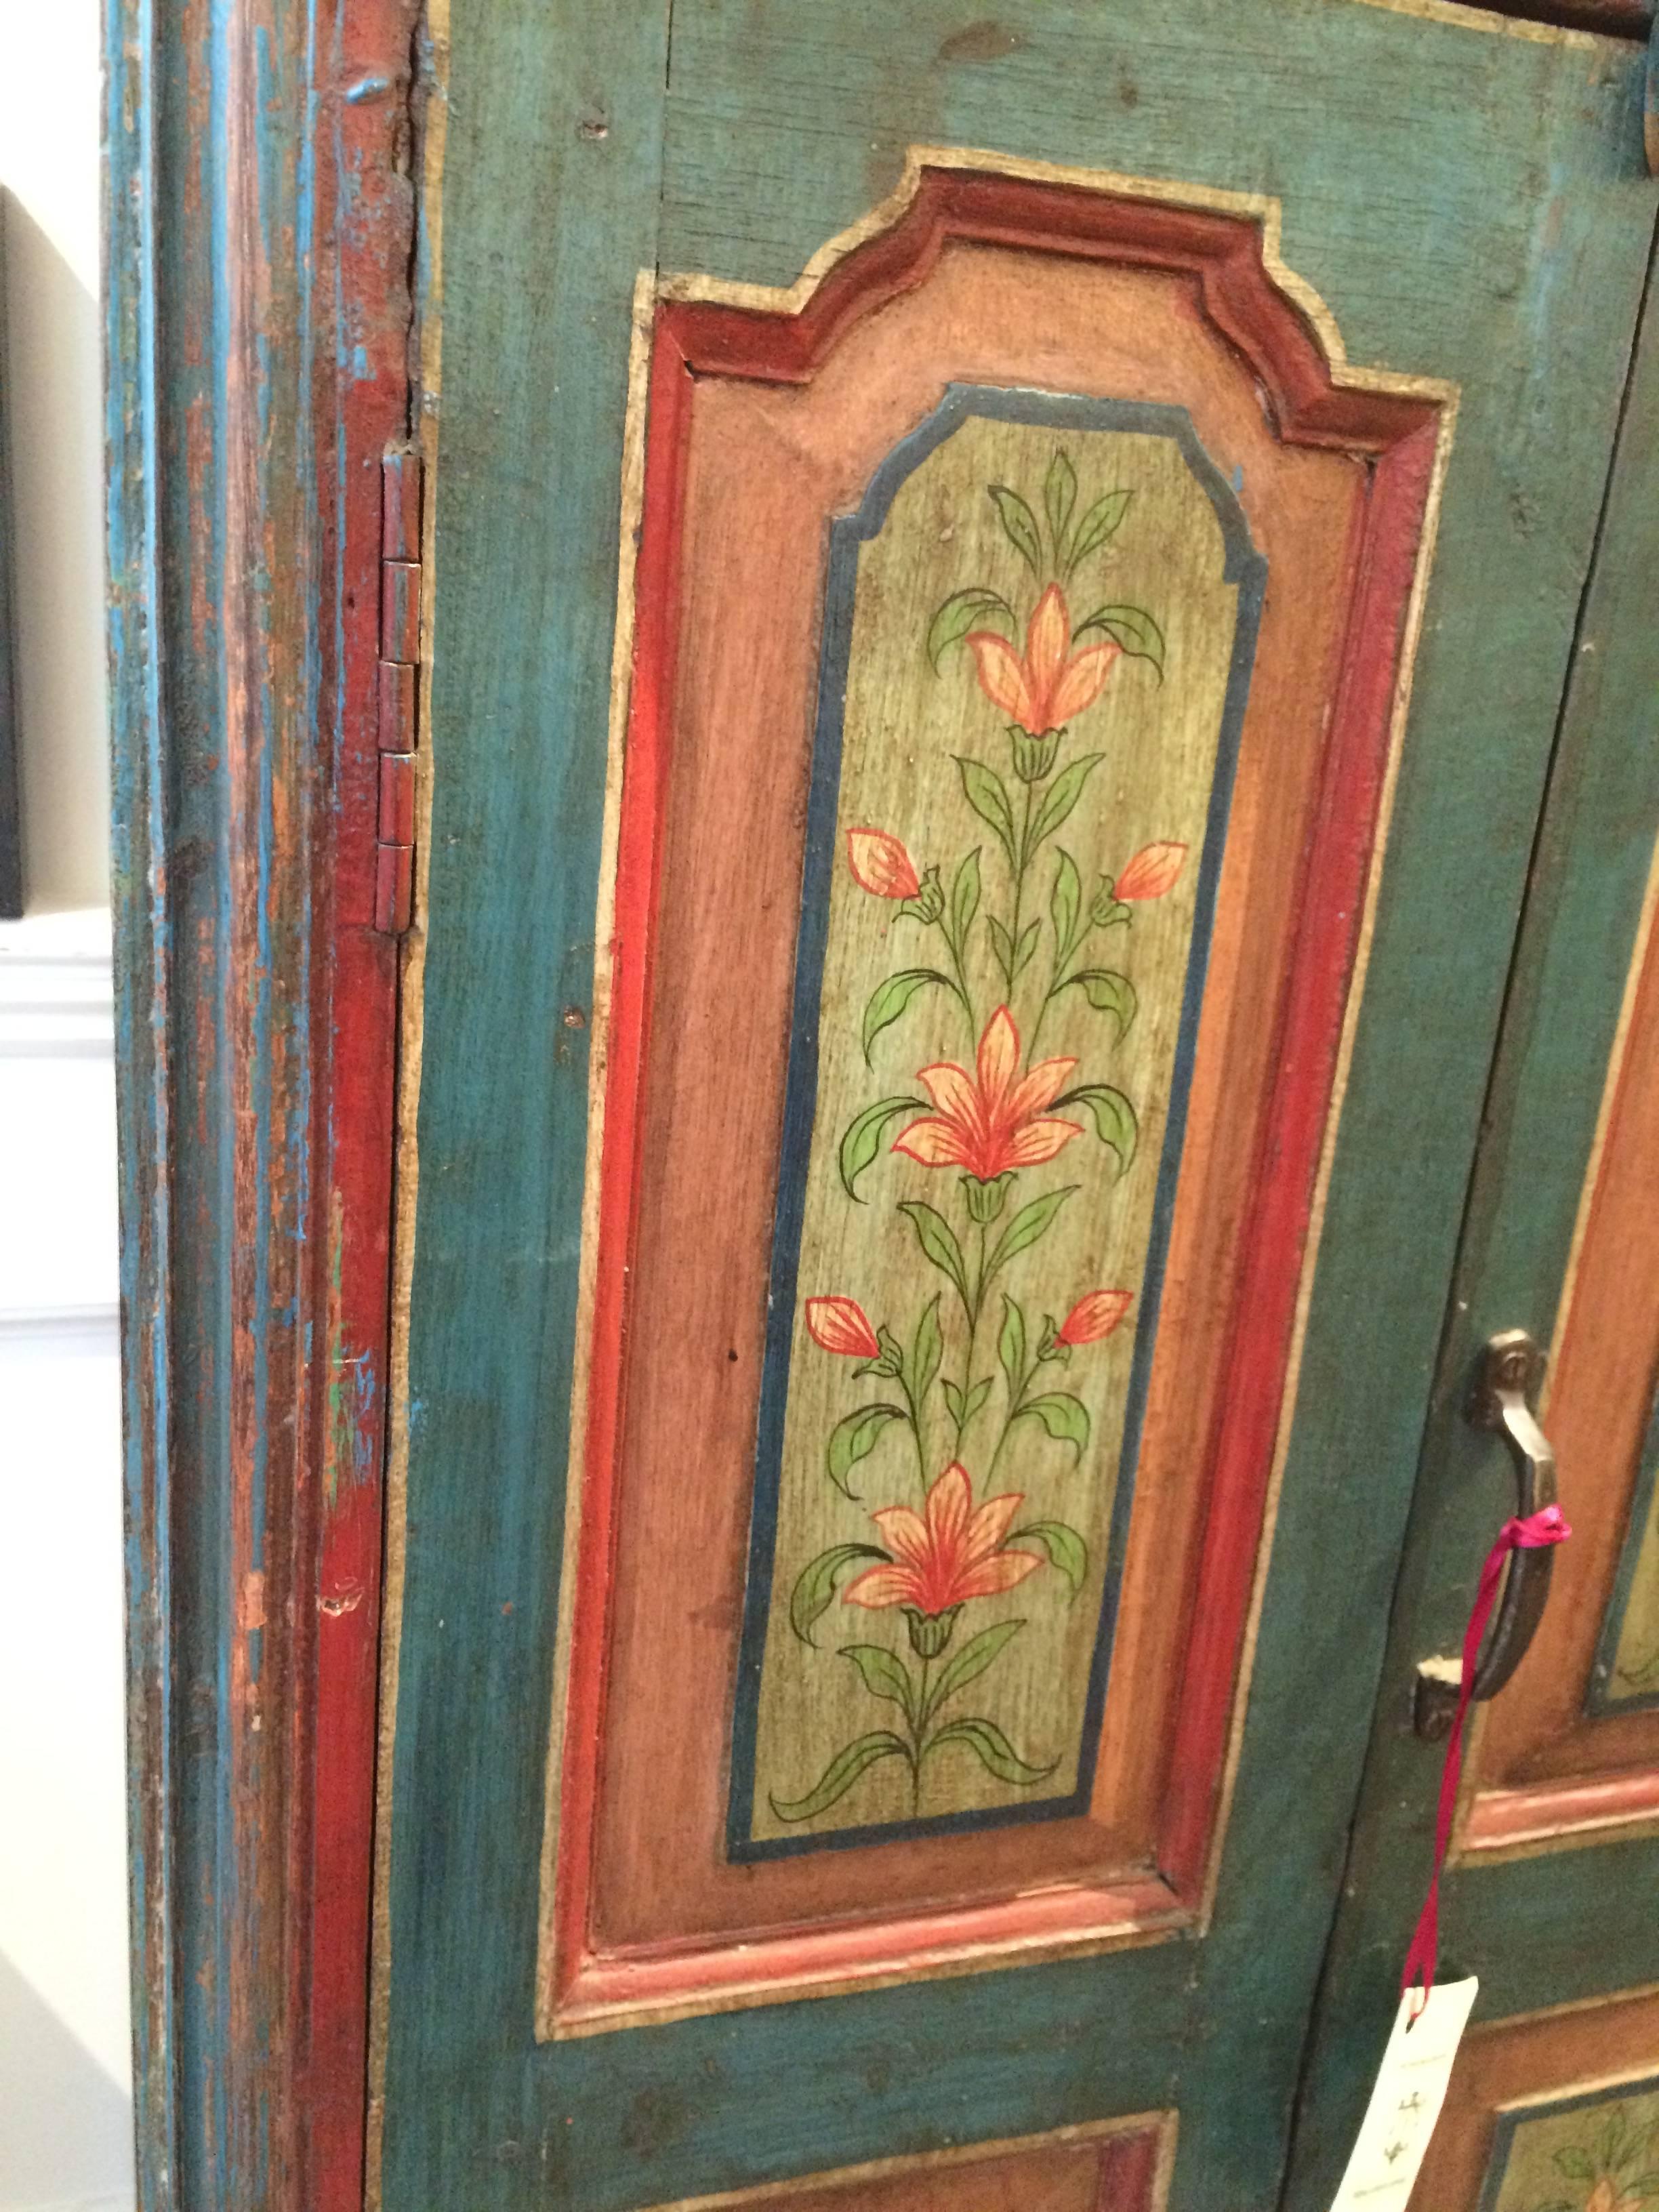 20th Century Lovely Early 1900s Hand-Painted Window Shutters Converted to Cabinet